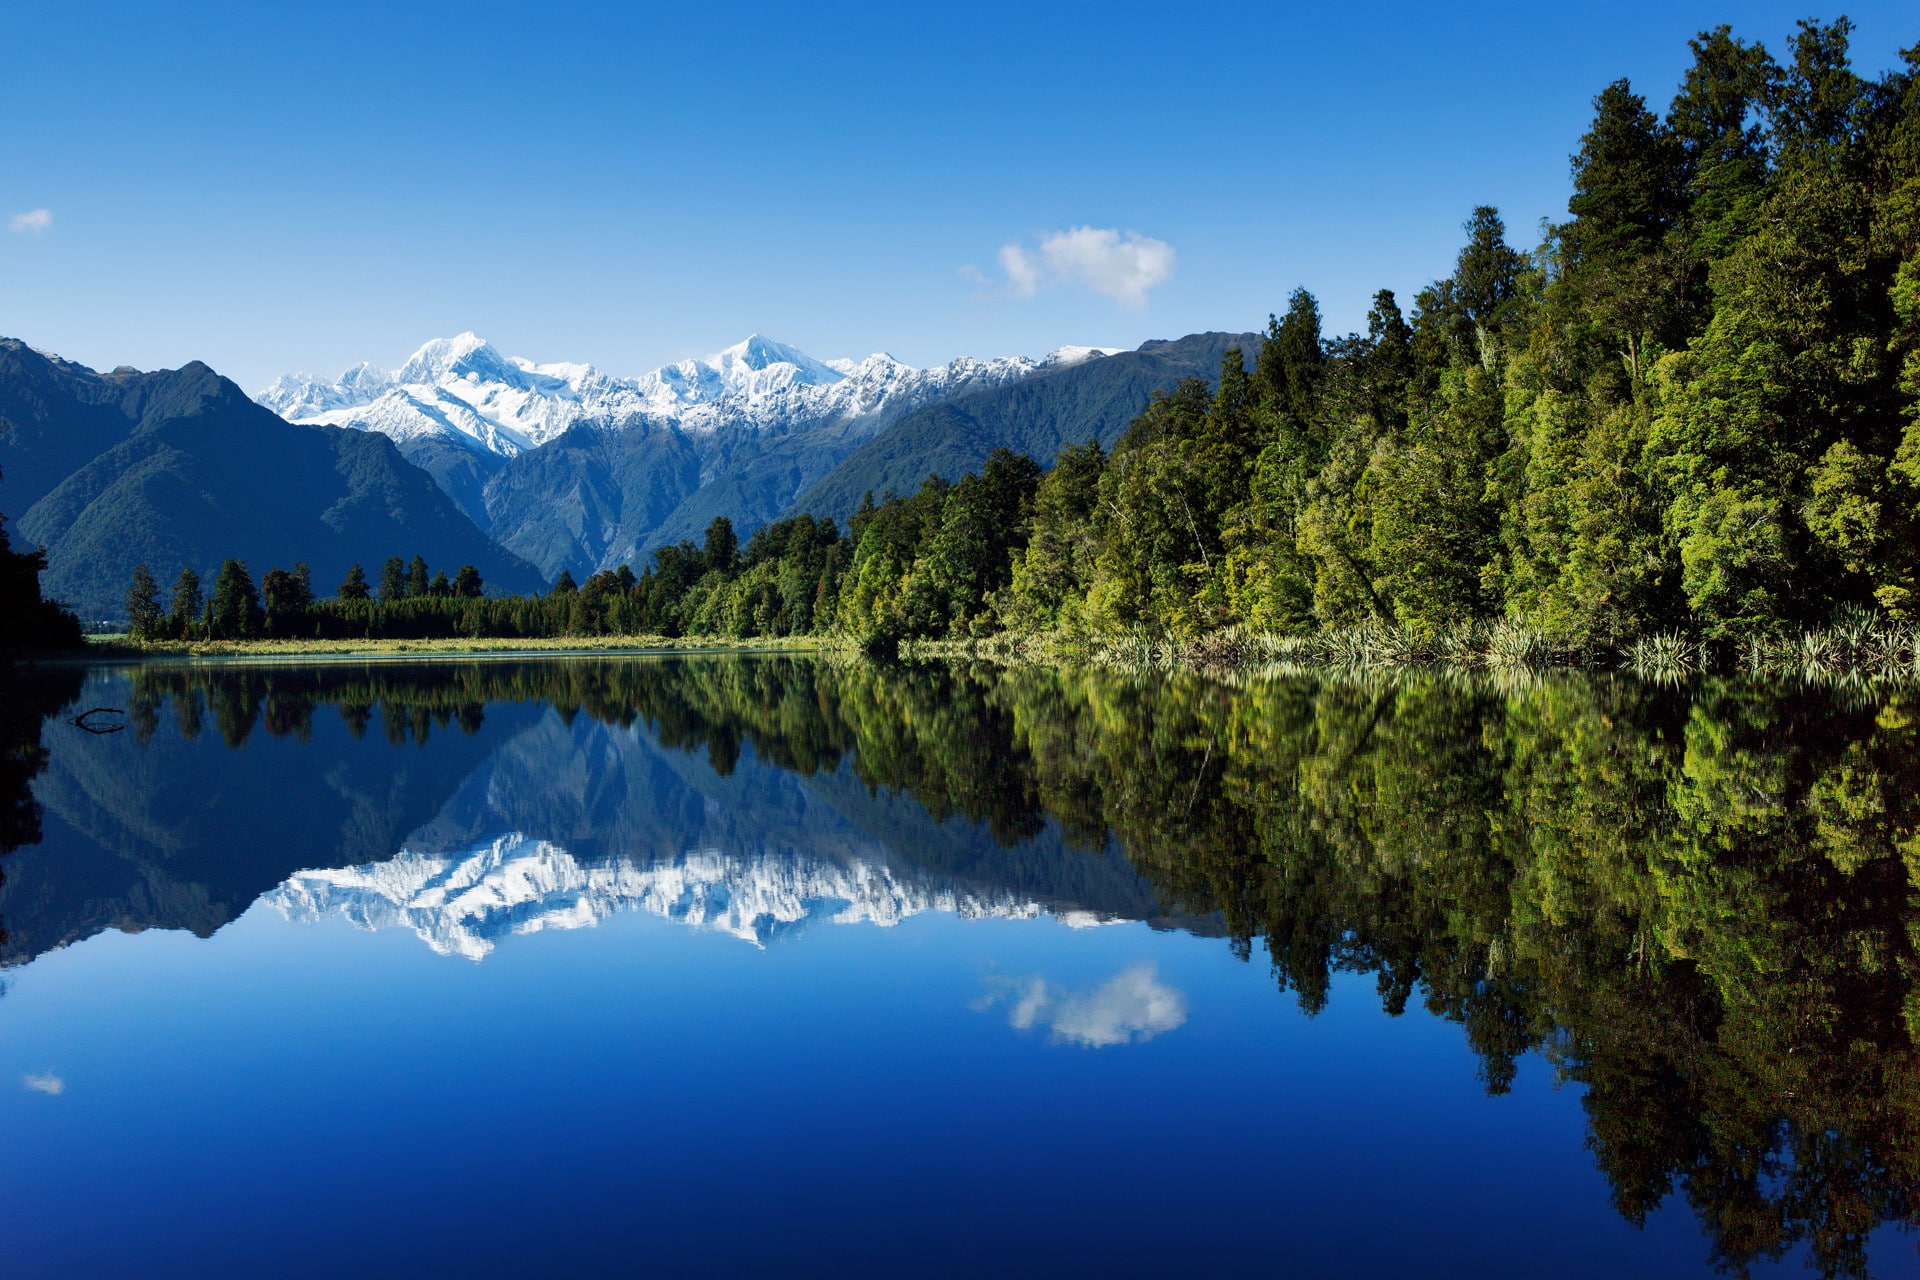 Lake Matheson, water, landscape, reflection, mountains, forest